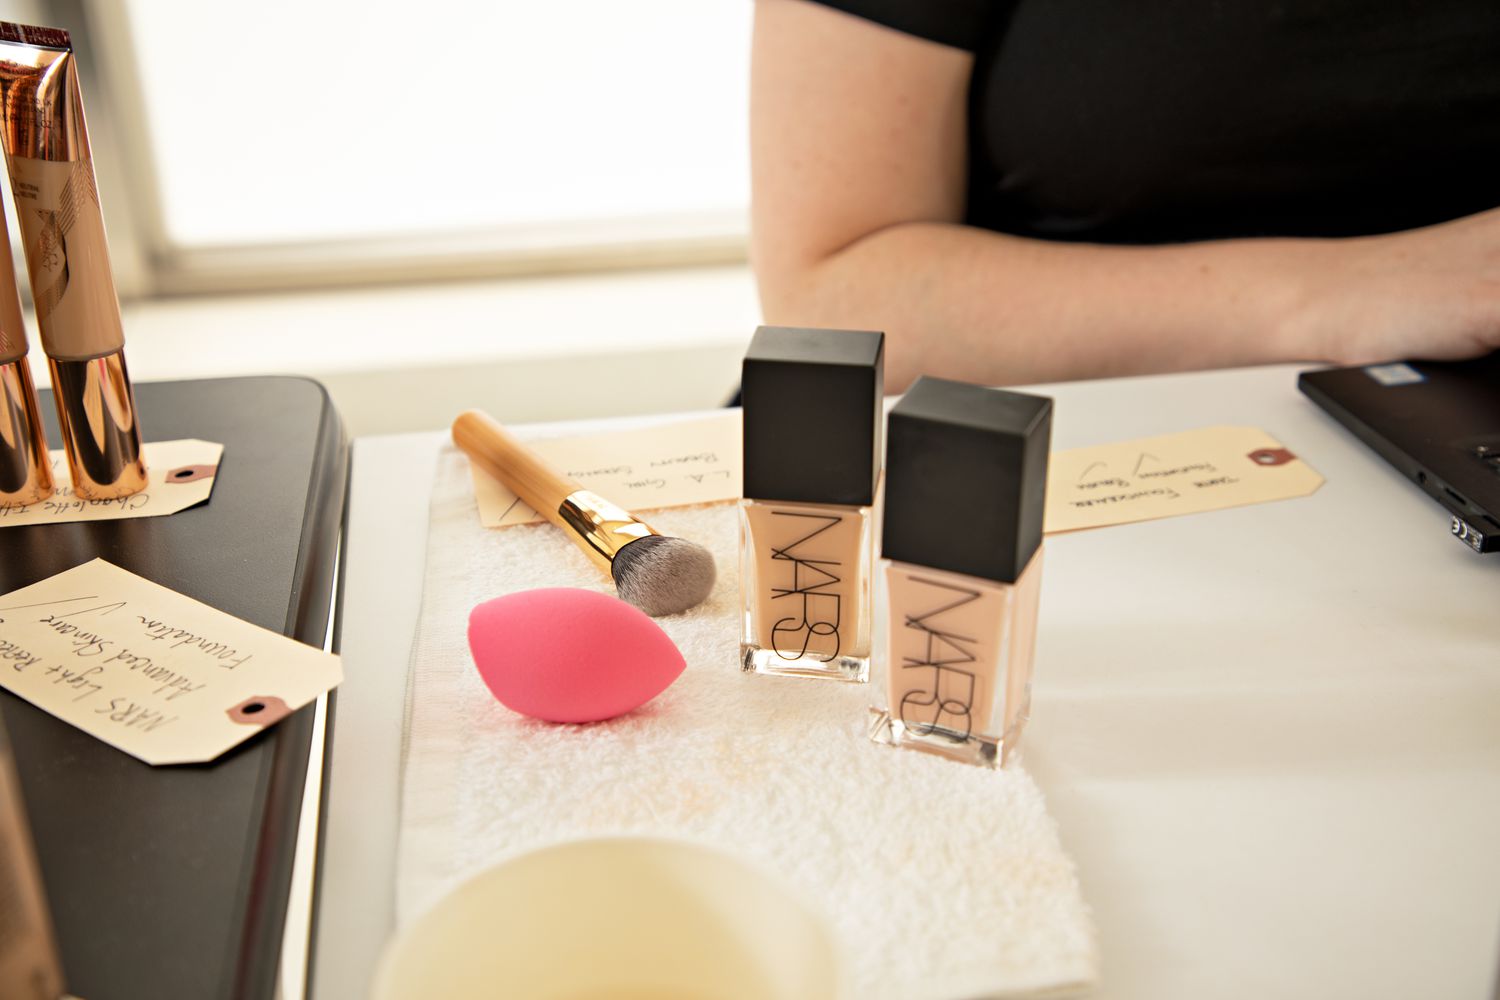 Tarte Foundcealer Foundation Brush laying on table next to cosmetics and person's arm